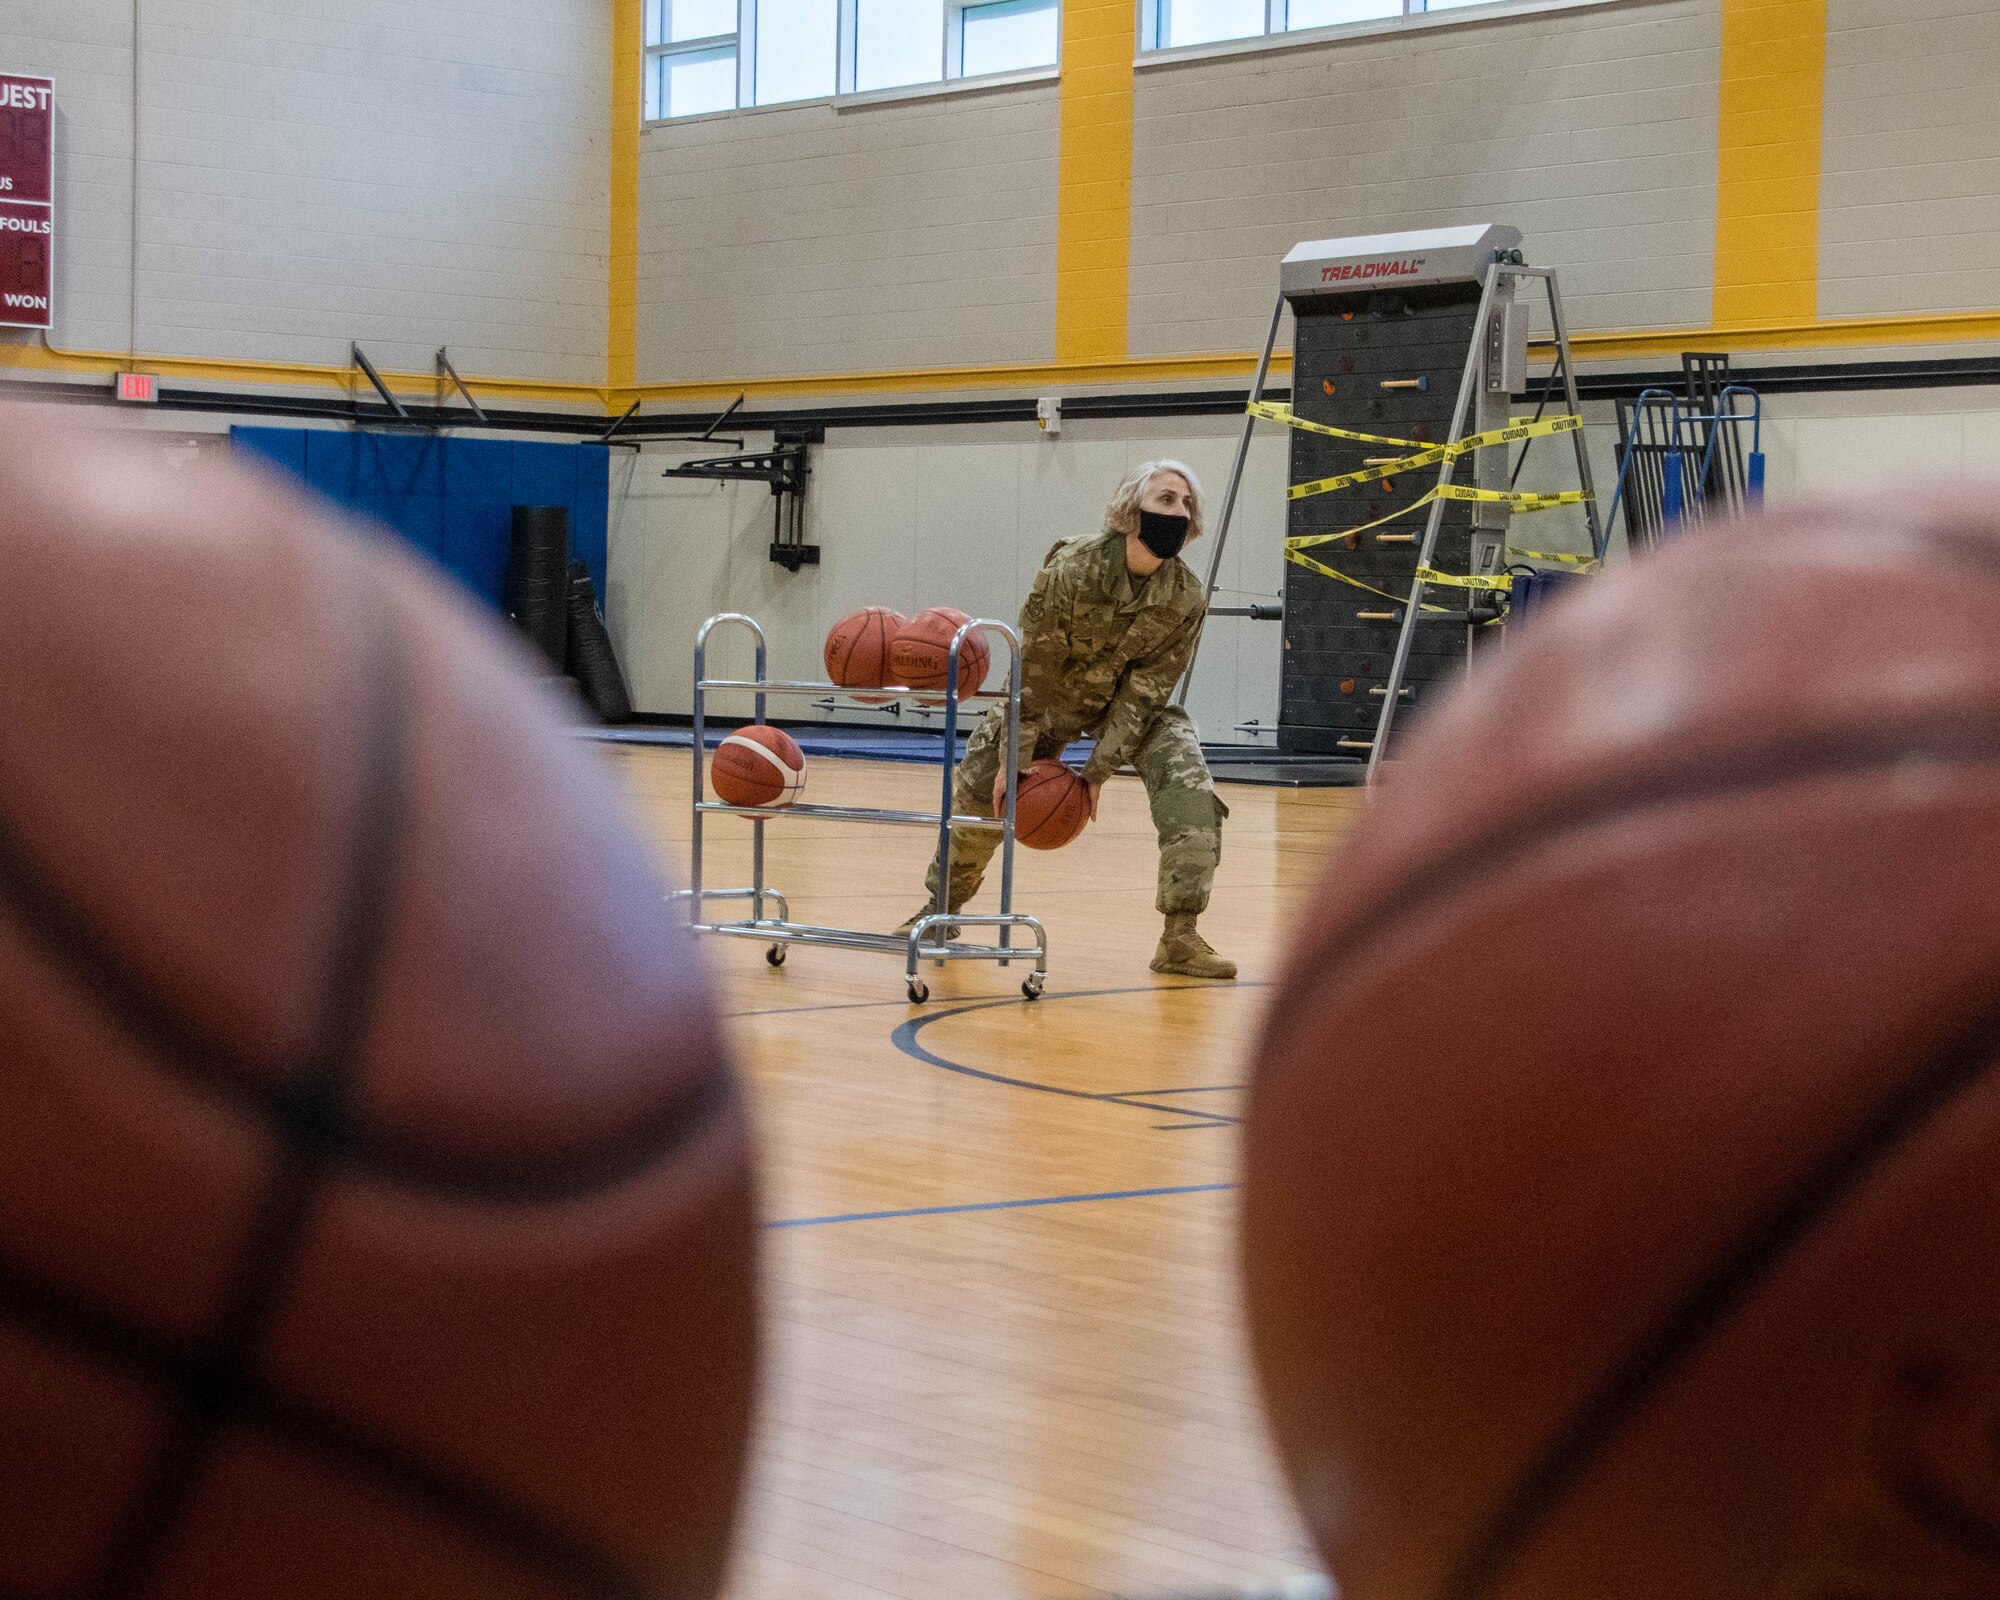 Chief Master Sgt. Vicki Robertson, 94th Airlift Wing command chief, participates in the three-point contest held at the fitness center, May 1 at Dobbins Air Reserve Base, Ga. The 94th Force Support Squadron held a three-point and free throw contest to commemorate the reopening of the fitness center that spanned from April 30 to May 1. (U.S. Air Force photo/Senior Airman Kendra Ransum)